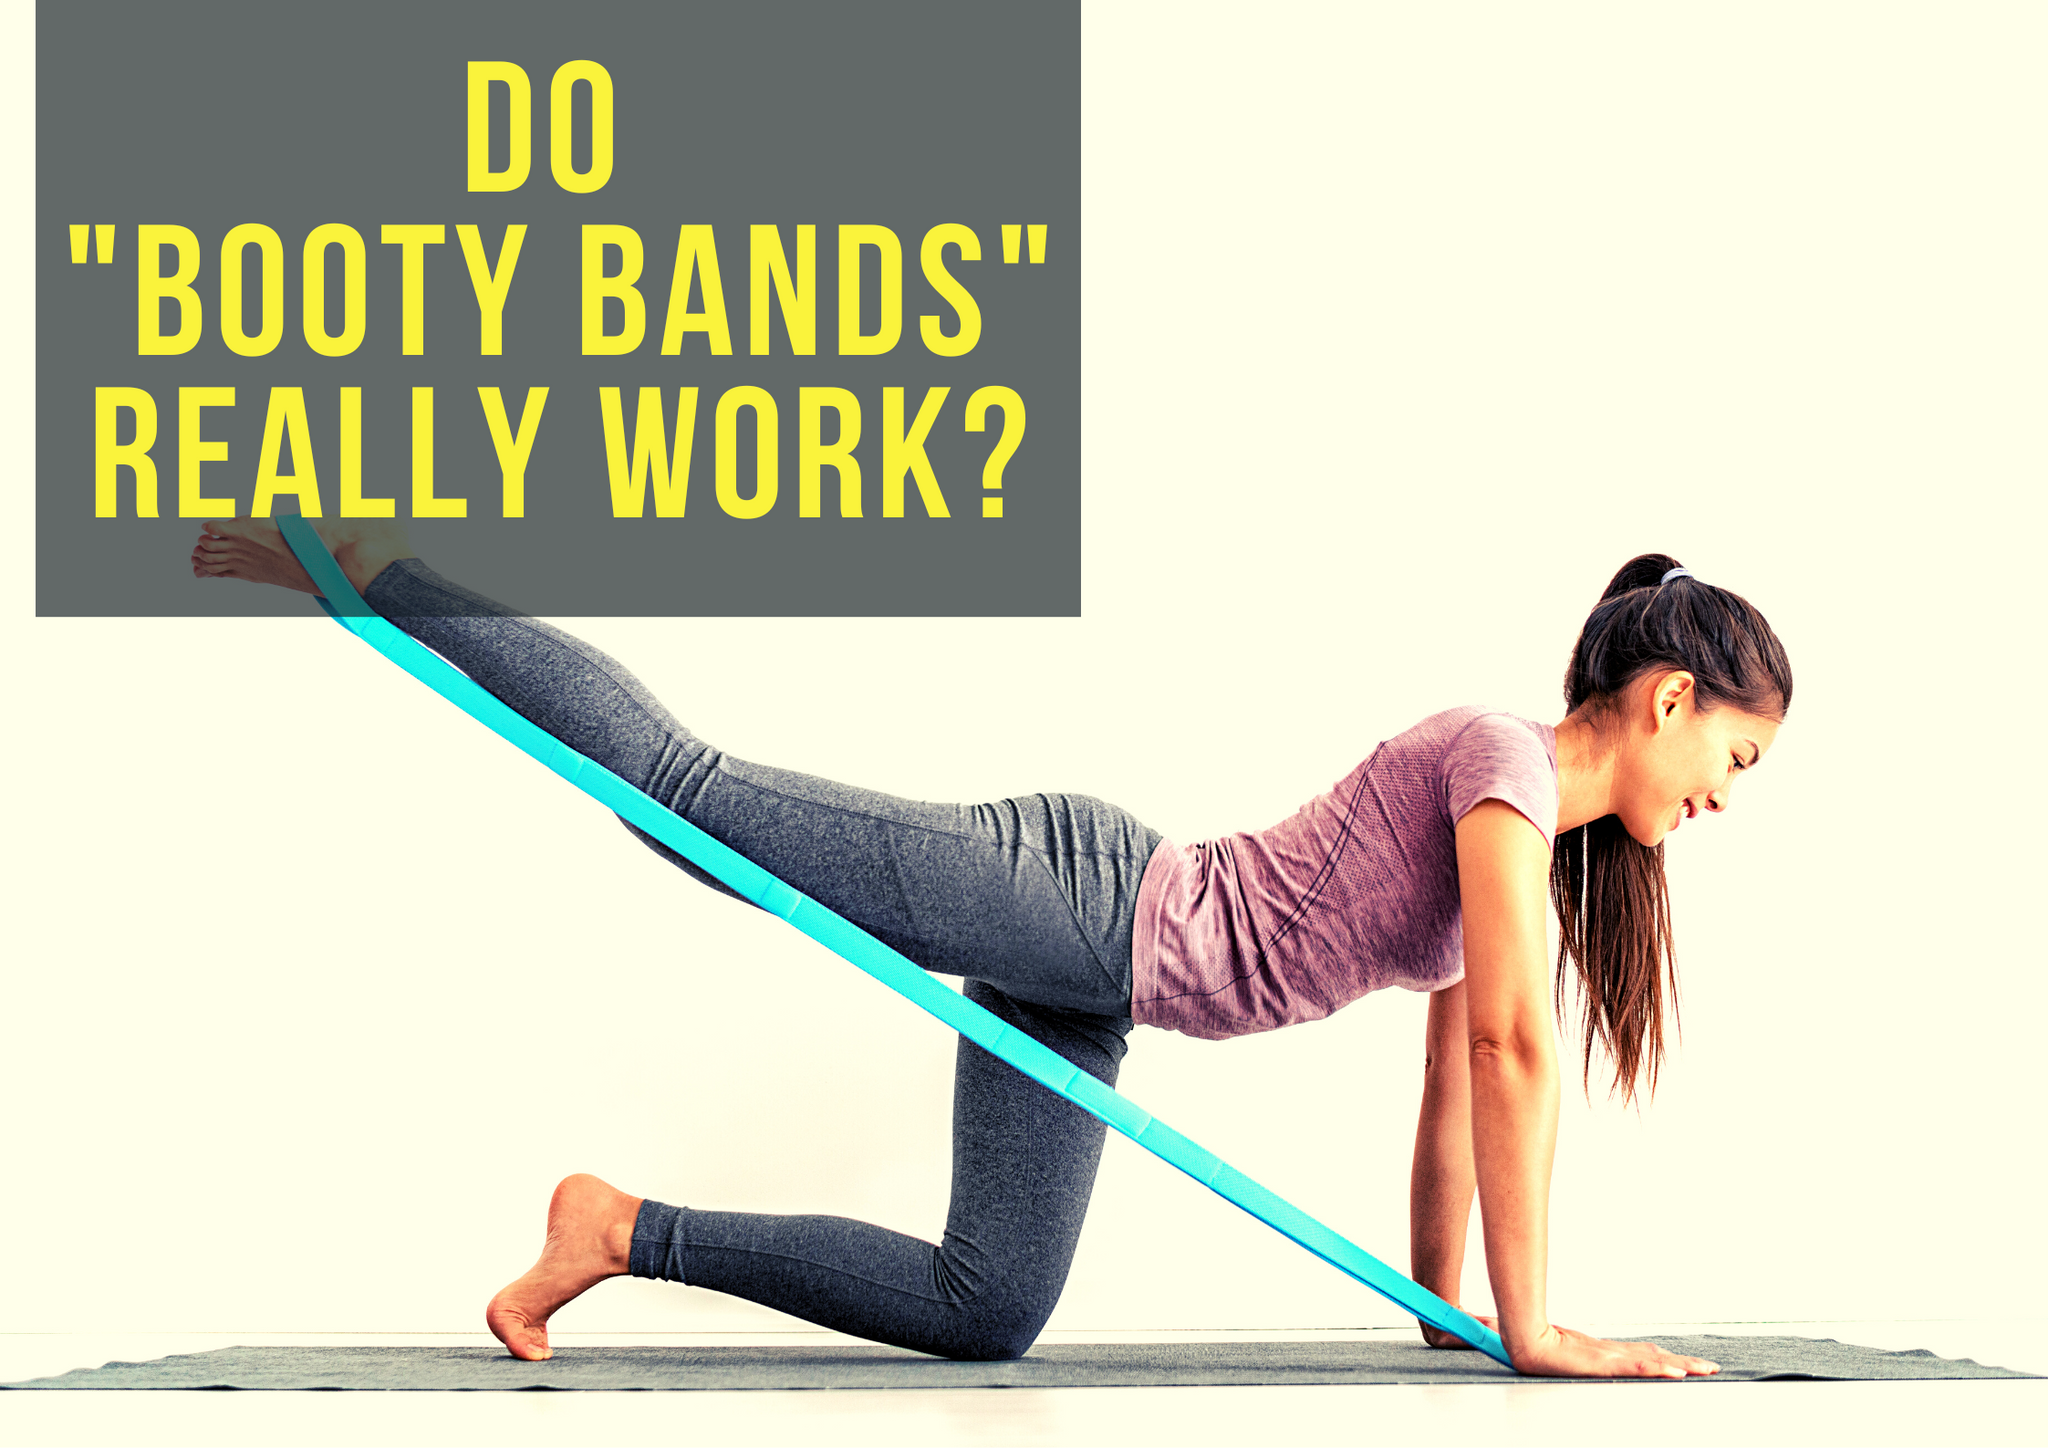 Do Booty Bands really work?